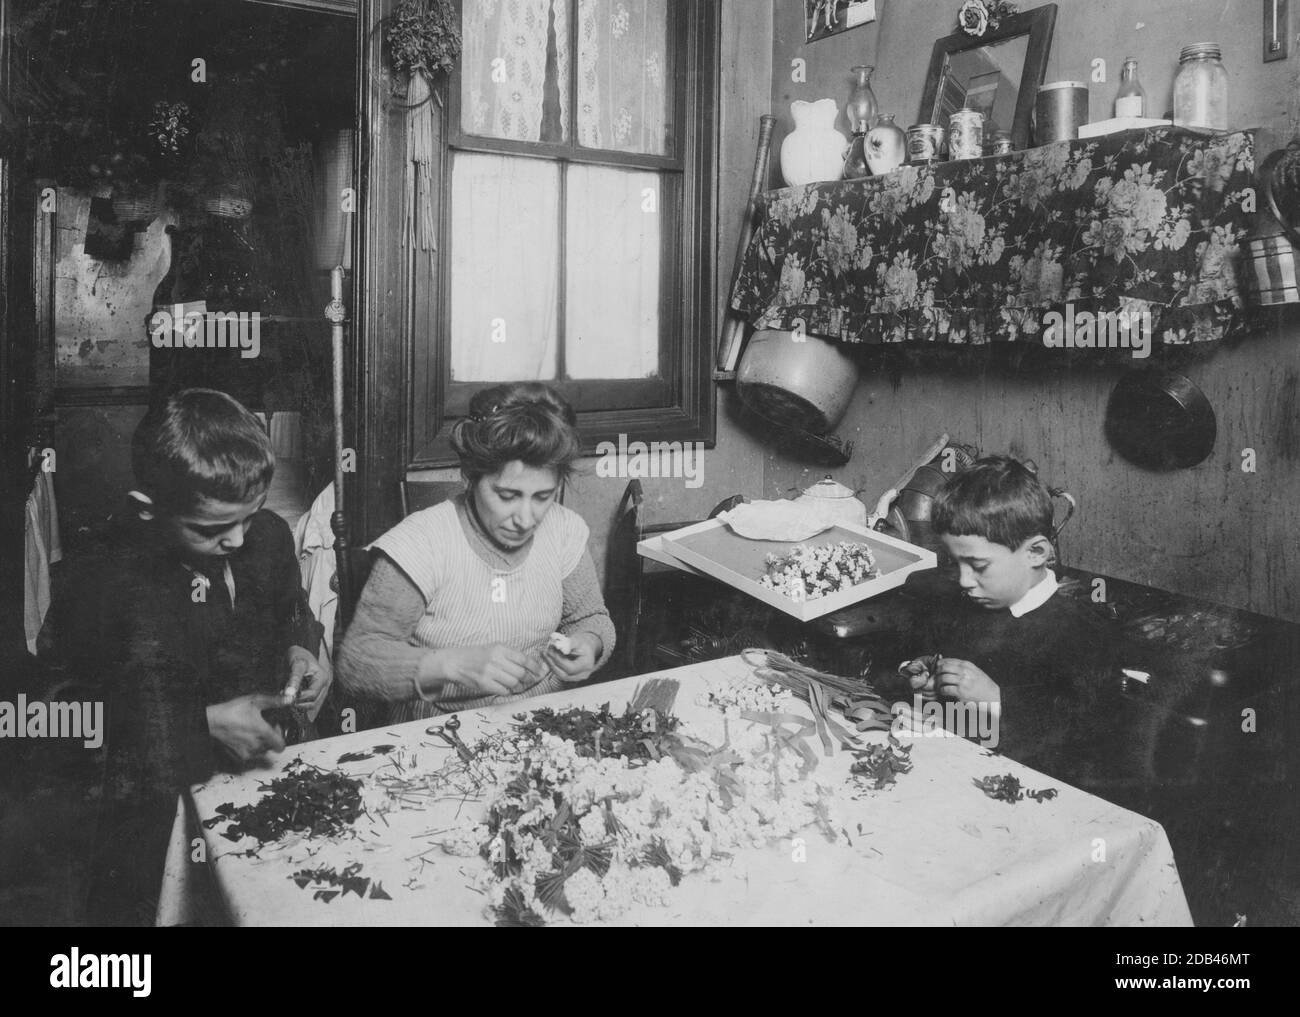 Mrs. A.L.A. She & her 3 children - 11, 9, & 6 yrs old work at flower making. The 2 year old is learning, & they say ought to be able to help in a year or so. Mother receives a pension.. Stock Photo